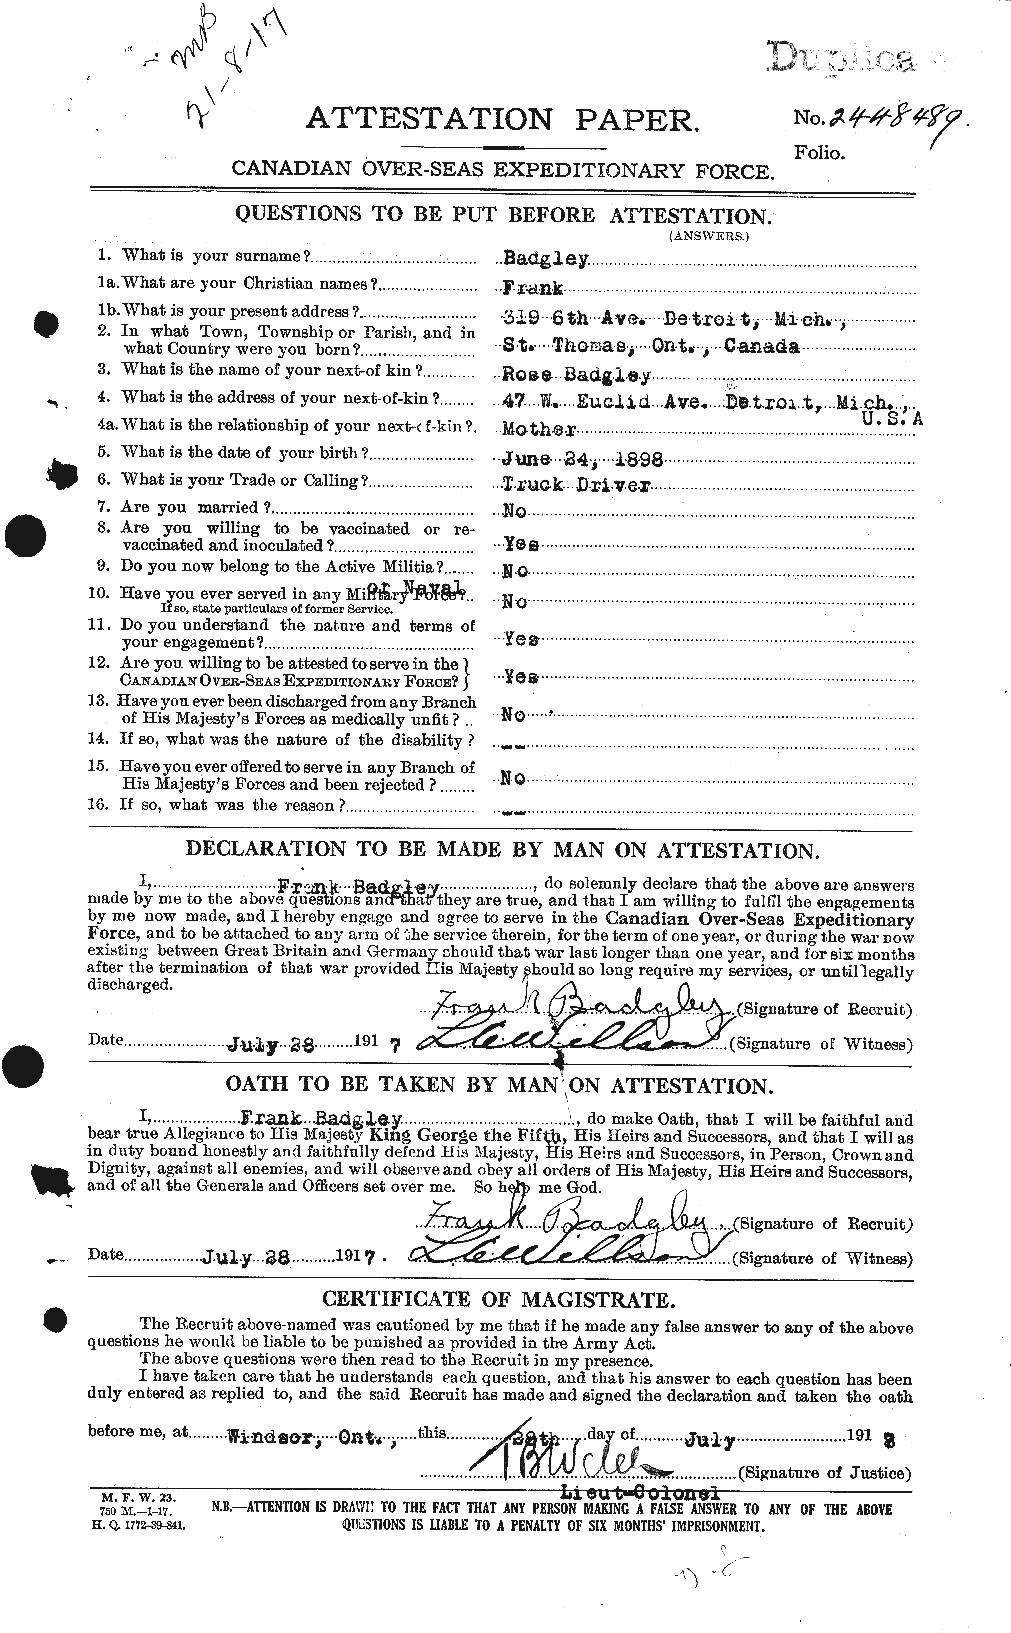 Personnel Records of the First World War - CEF 217729a